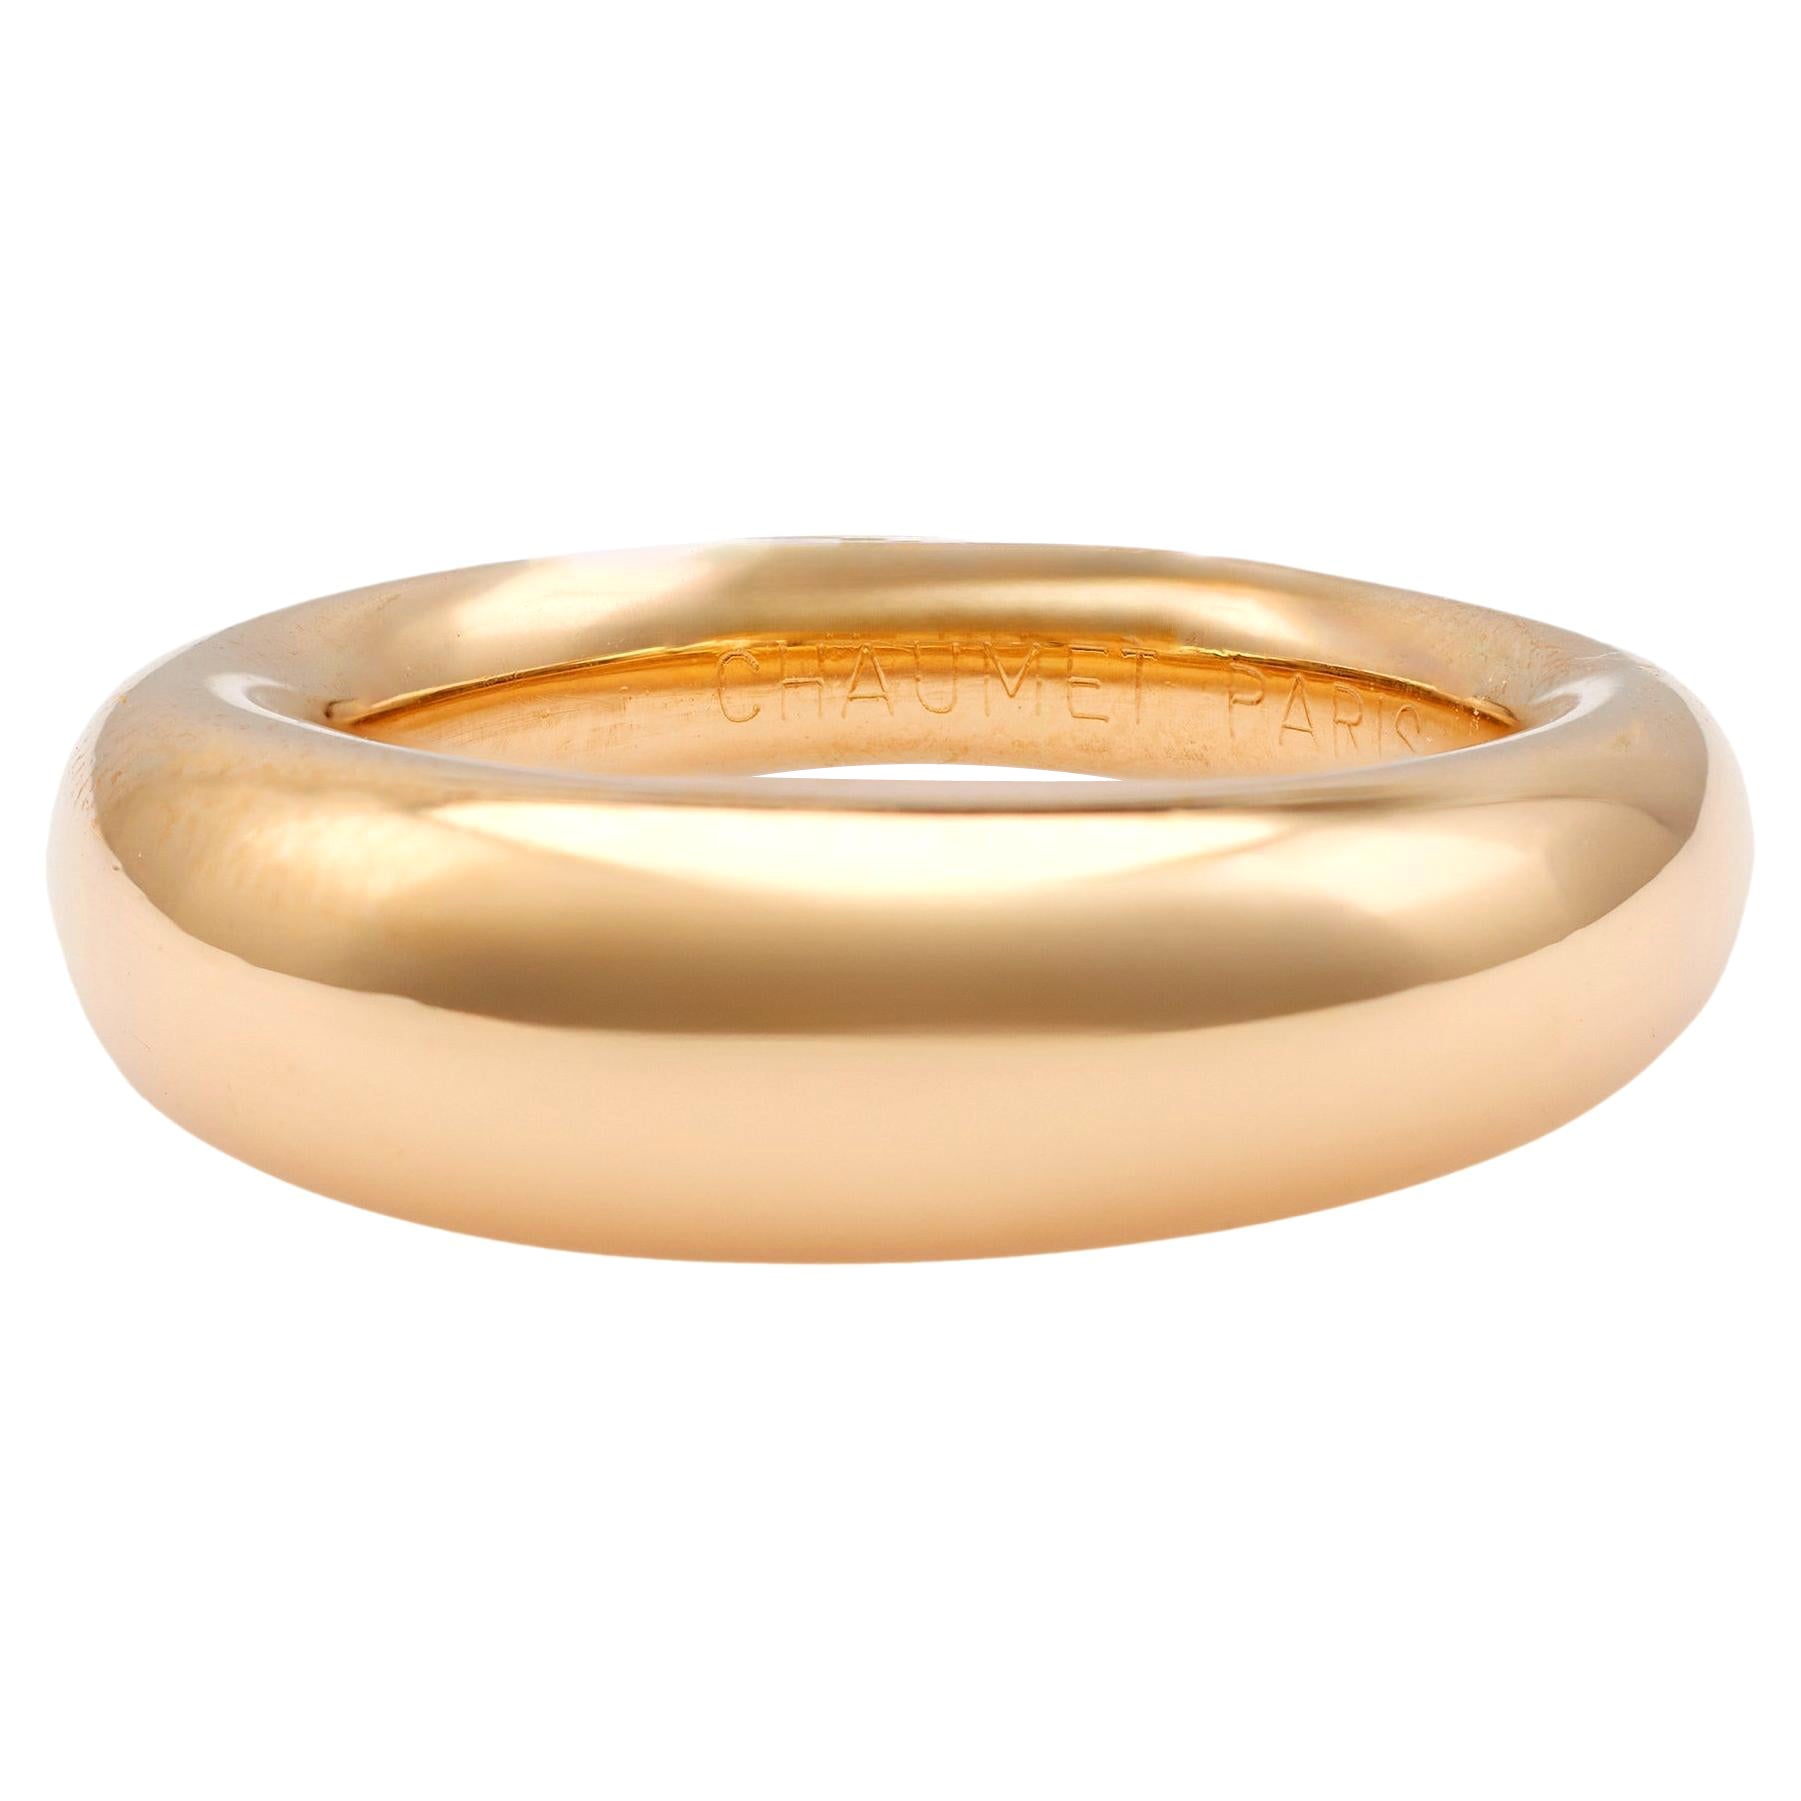 Vintage Chaumet 18k Yellow Gold Anneau Dome Ring For Sale